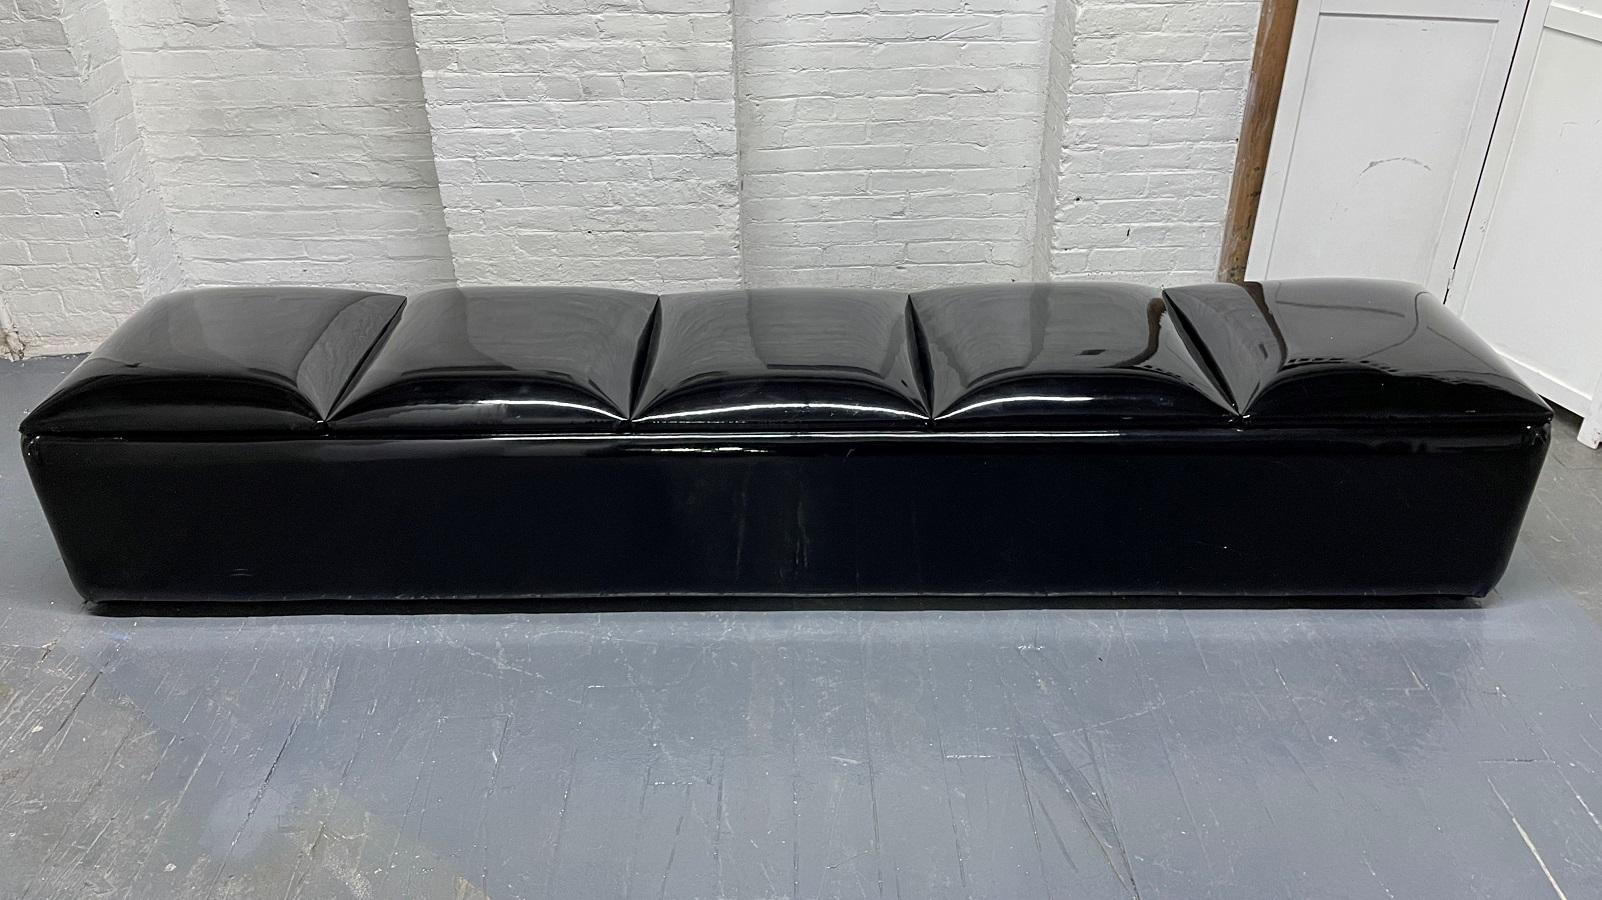 Pair of 1960s long black vinyl benches. Nice shiny vinyl, well made and comfortable.